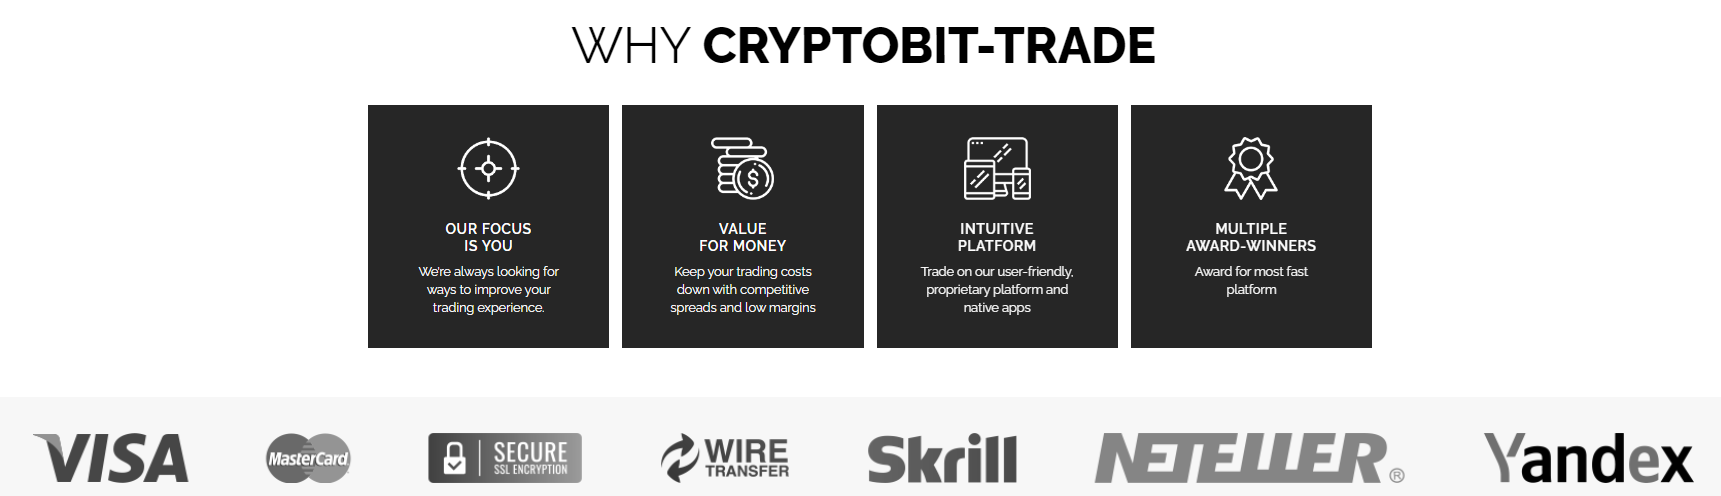 opening an account with CryptoBit-Trade